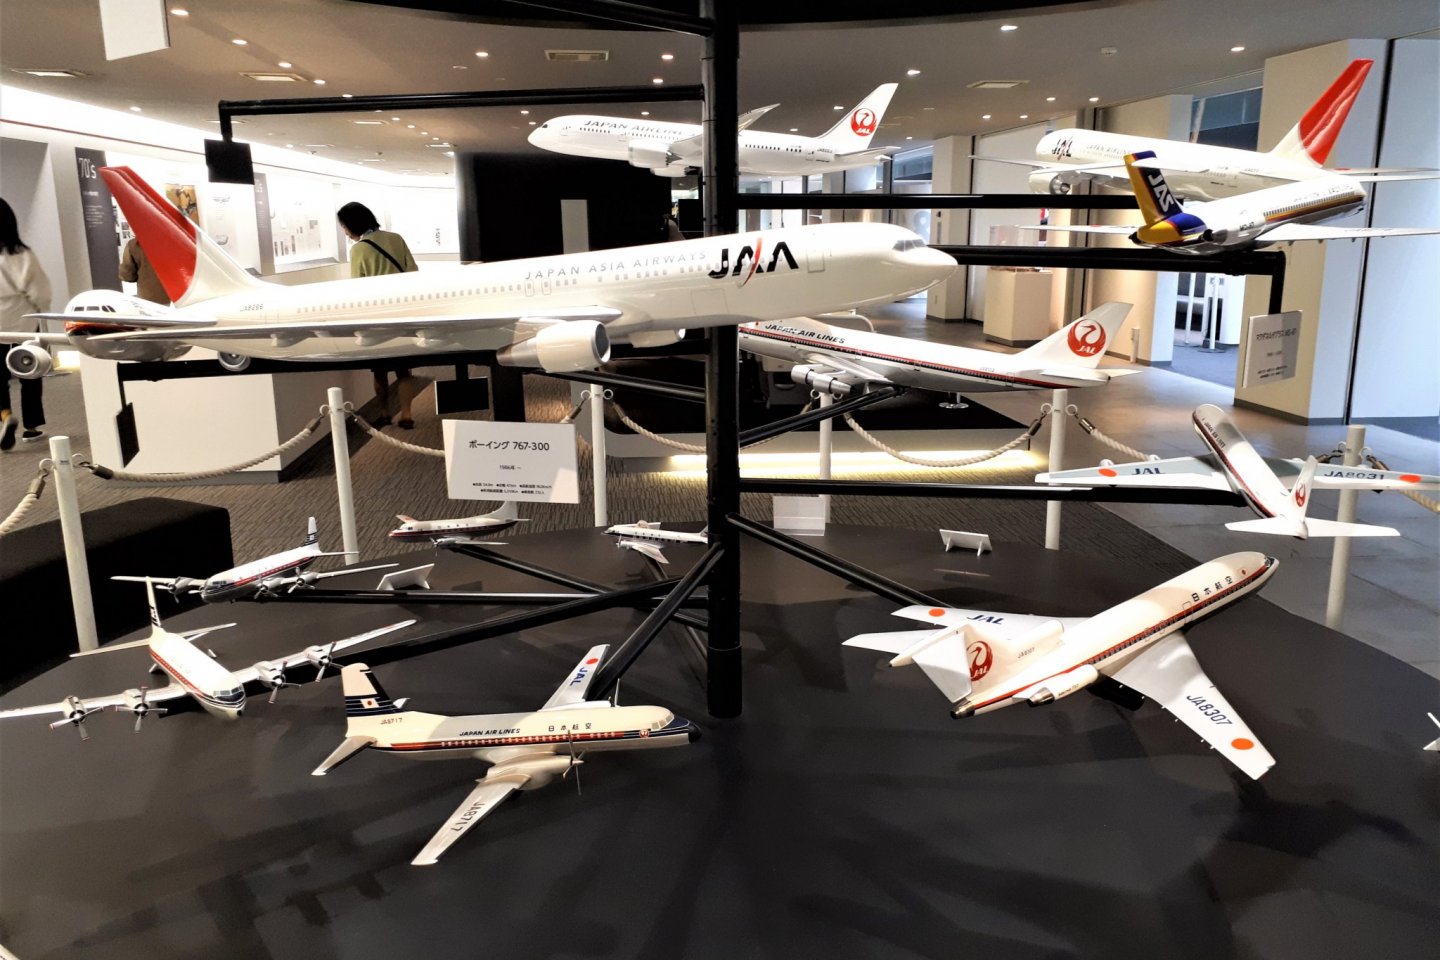 Some of the model planes on view before the tour